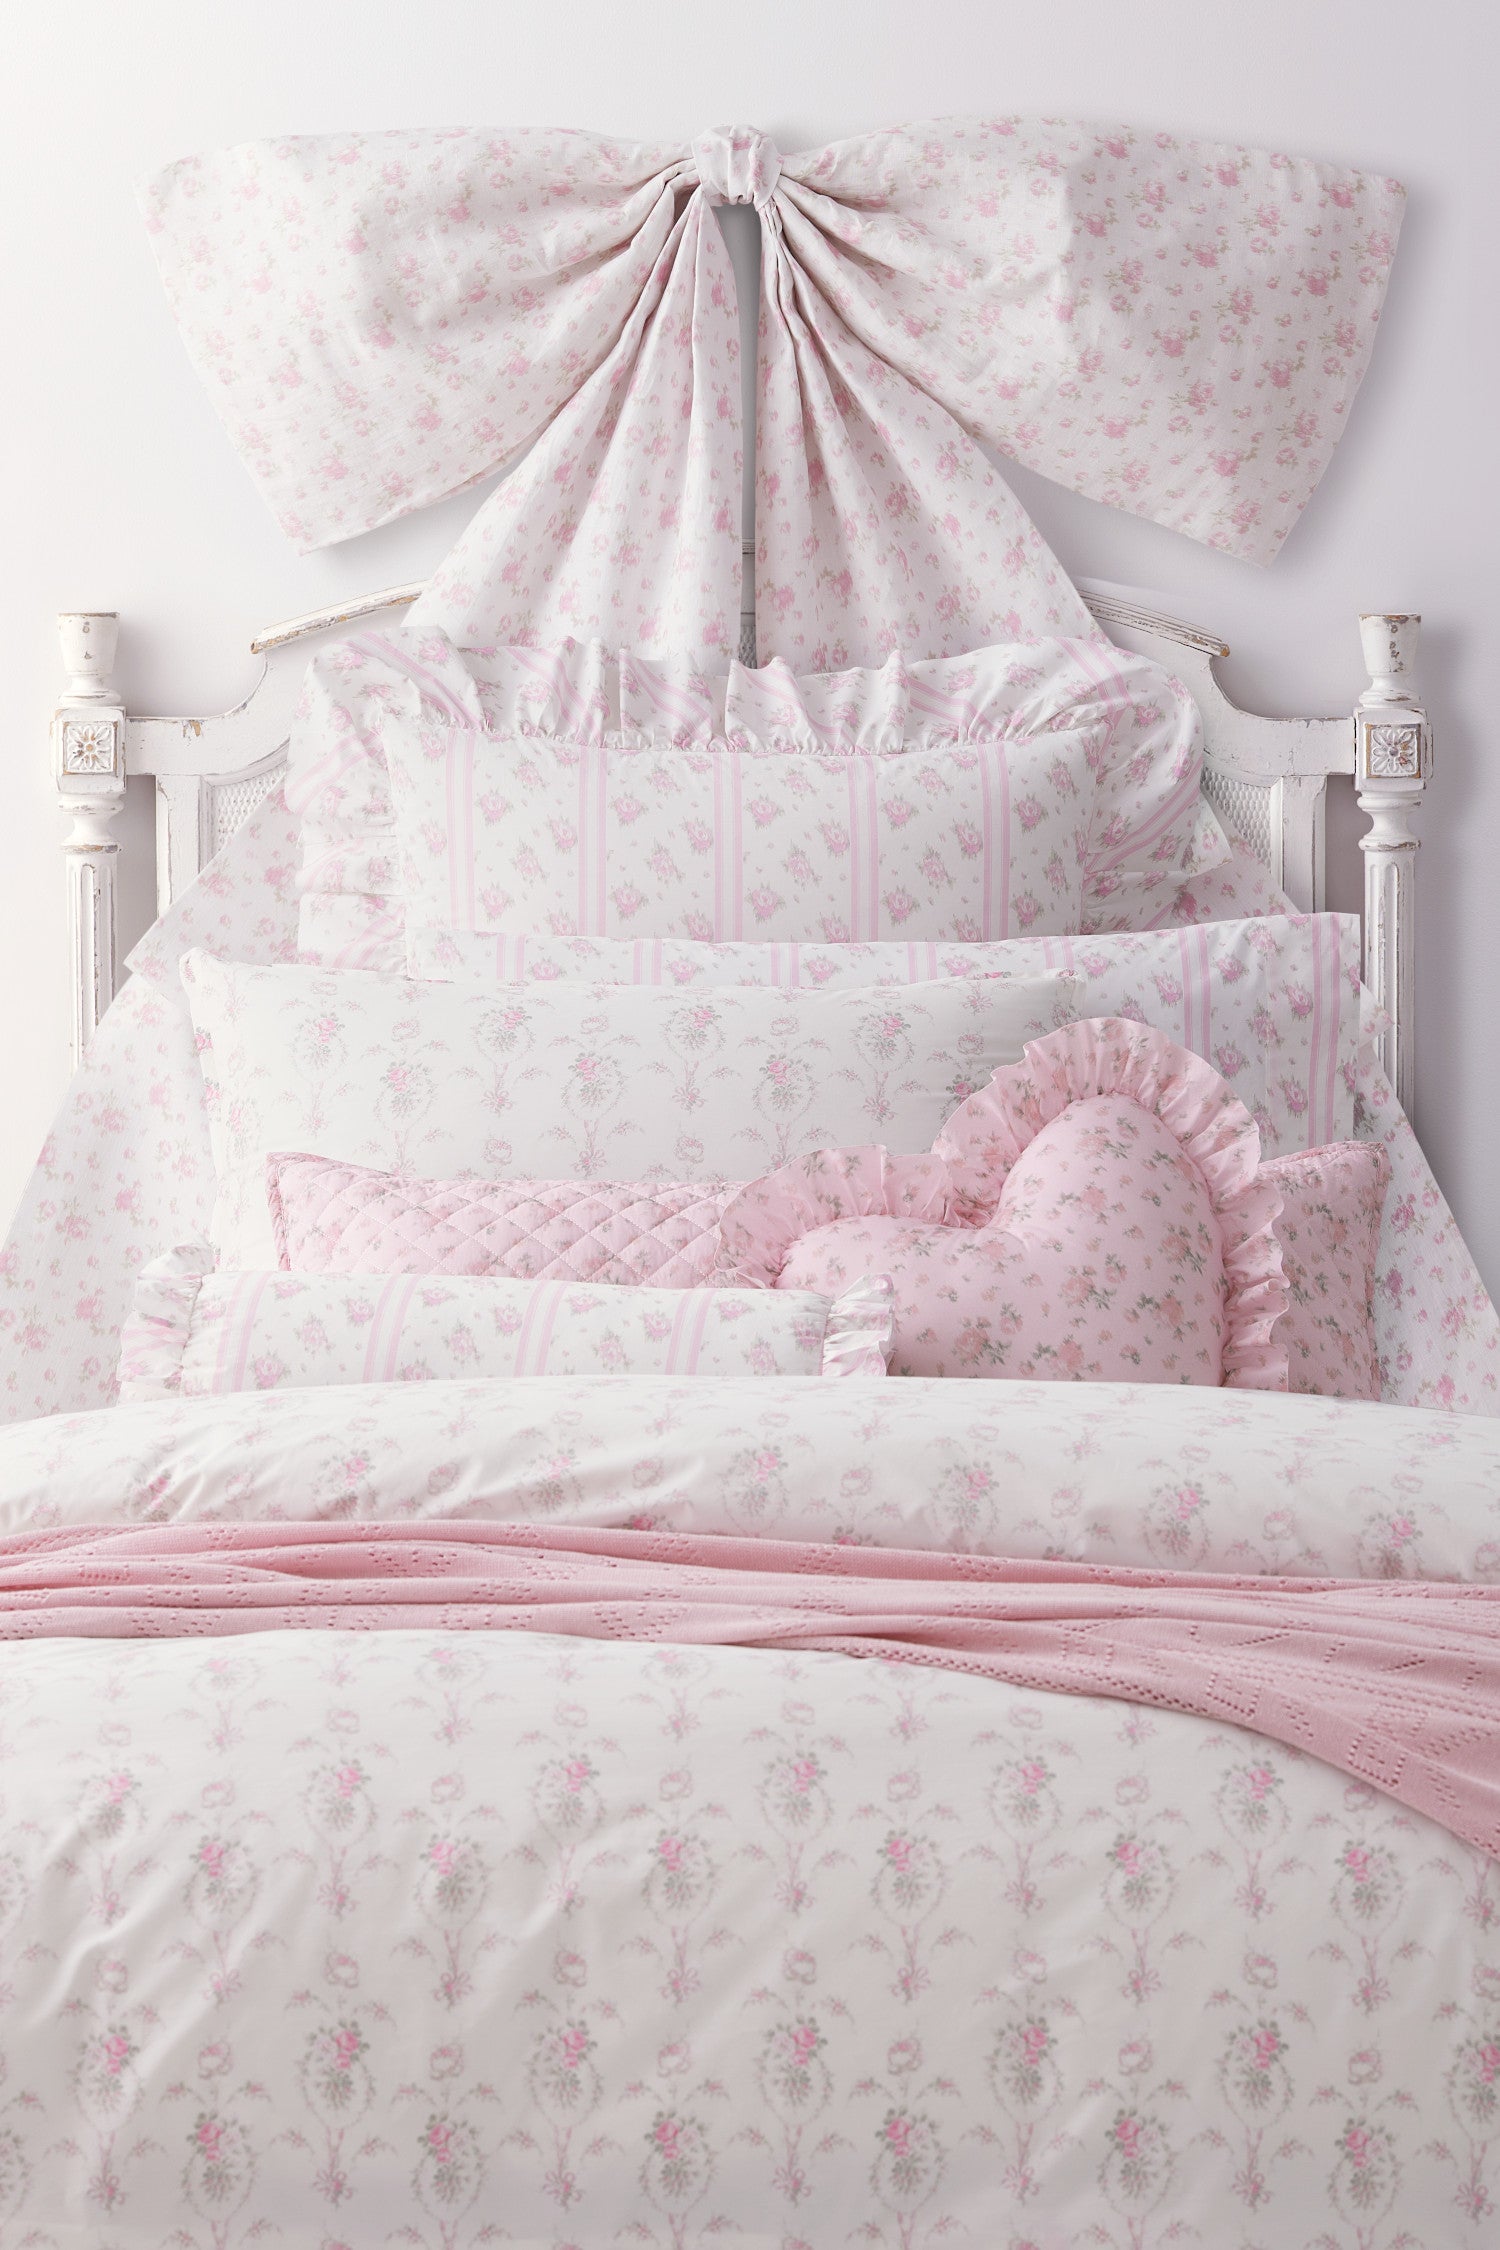 This dreamy ensemble features a delicate pink floral pattern on a pristine white backdrop. Crafted from 100% cotton